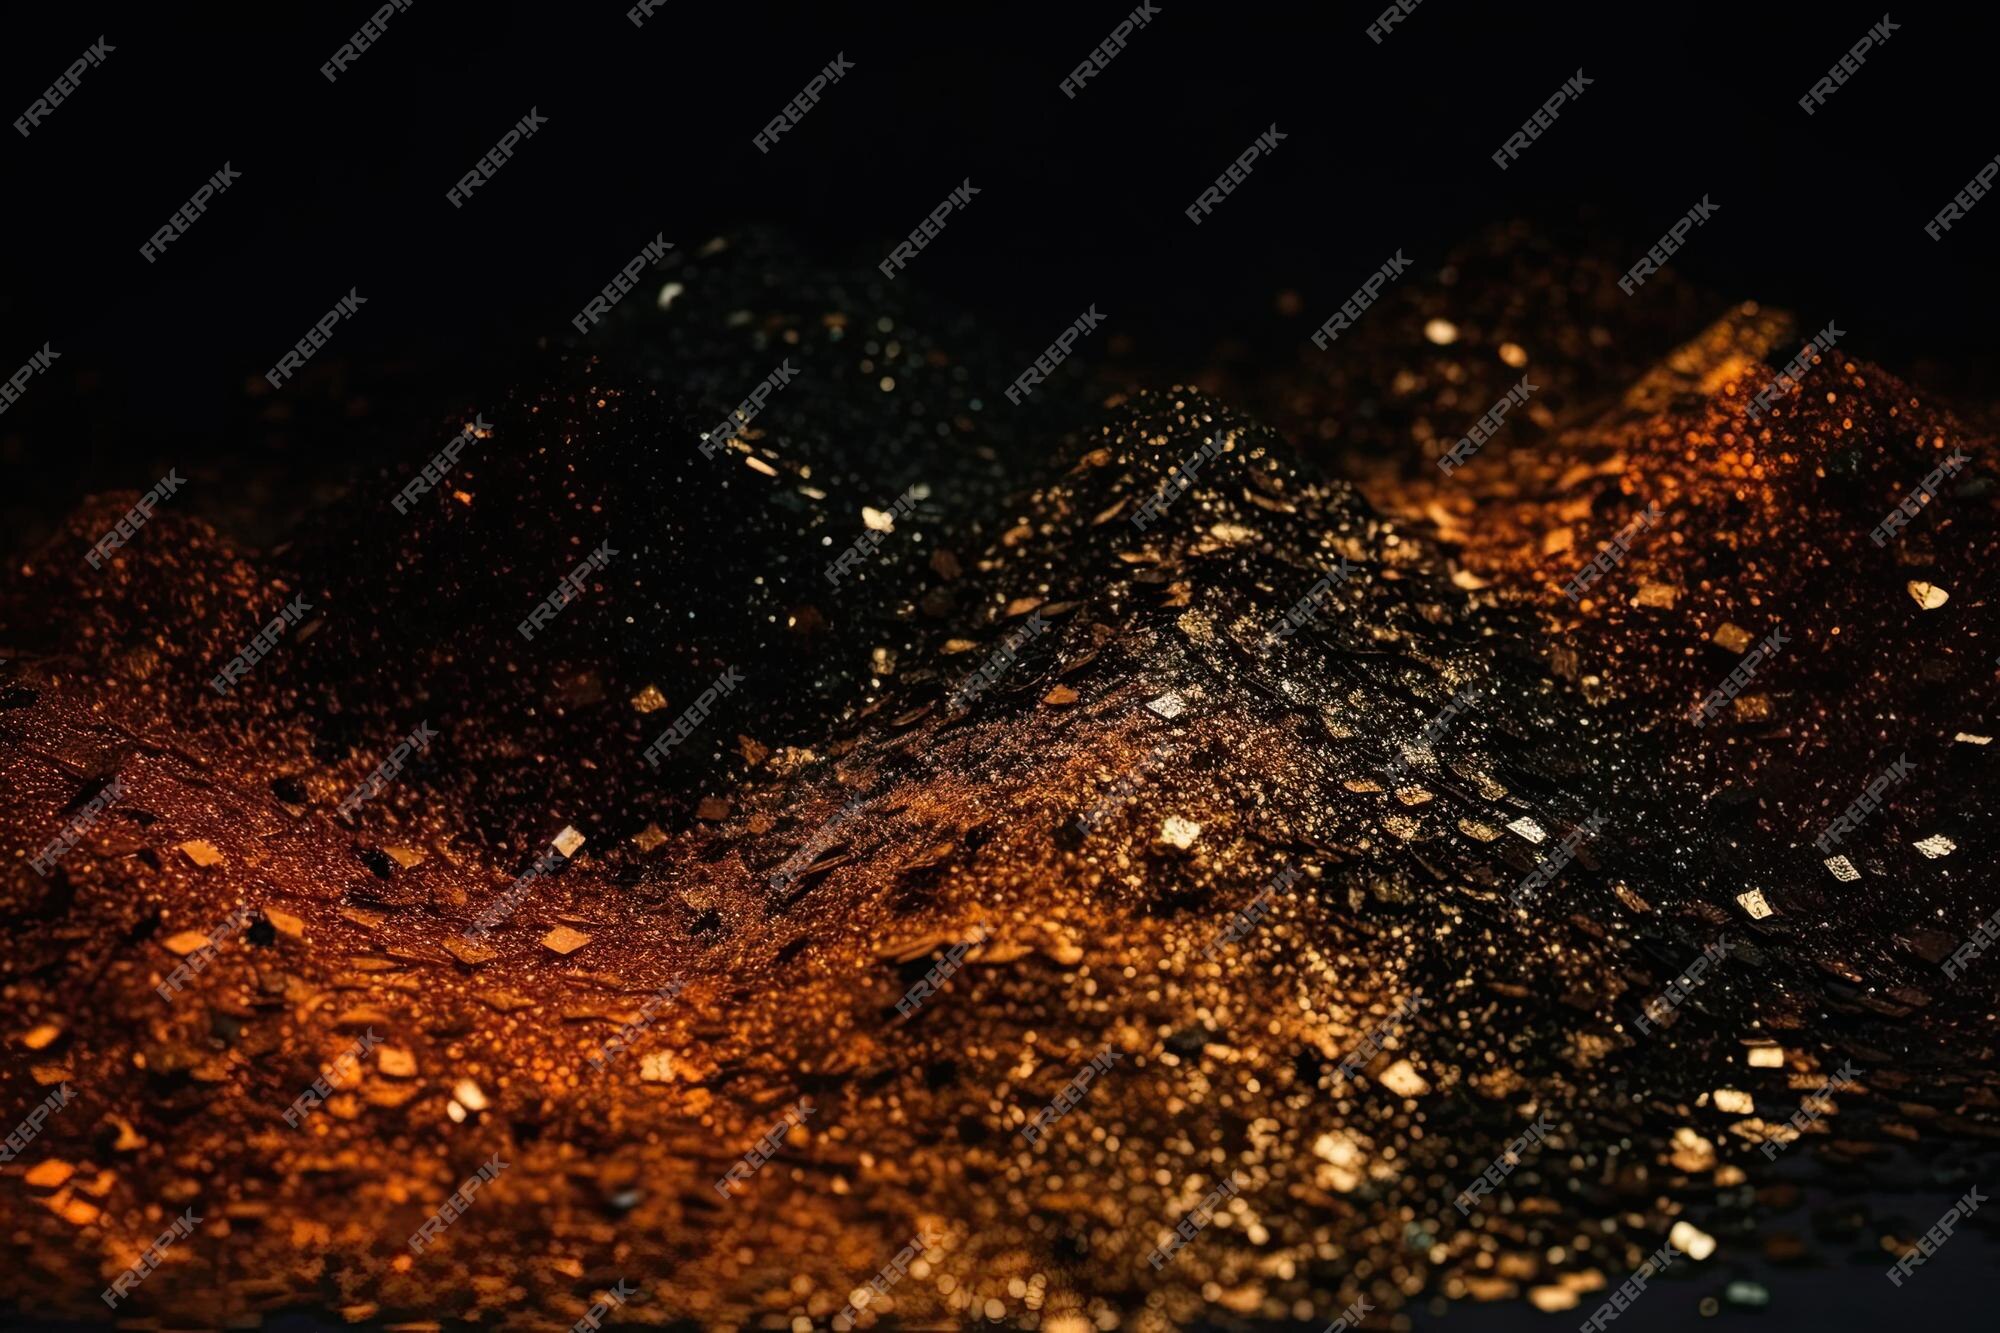 Gold glittering star magic dust on background. Stock Photo by